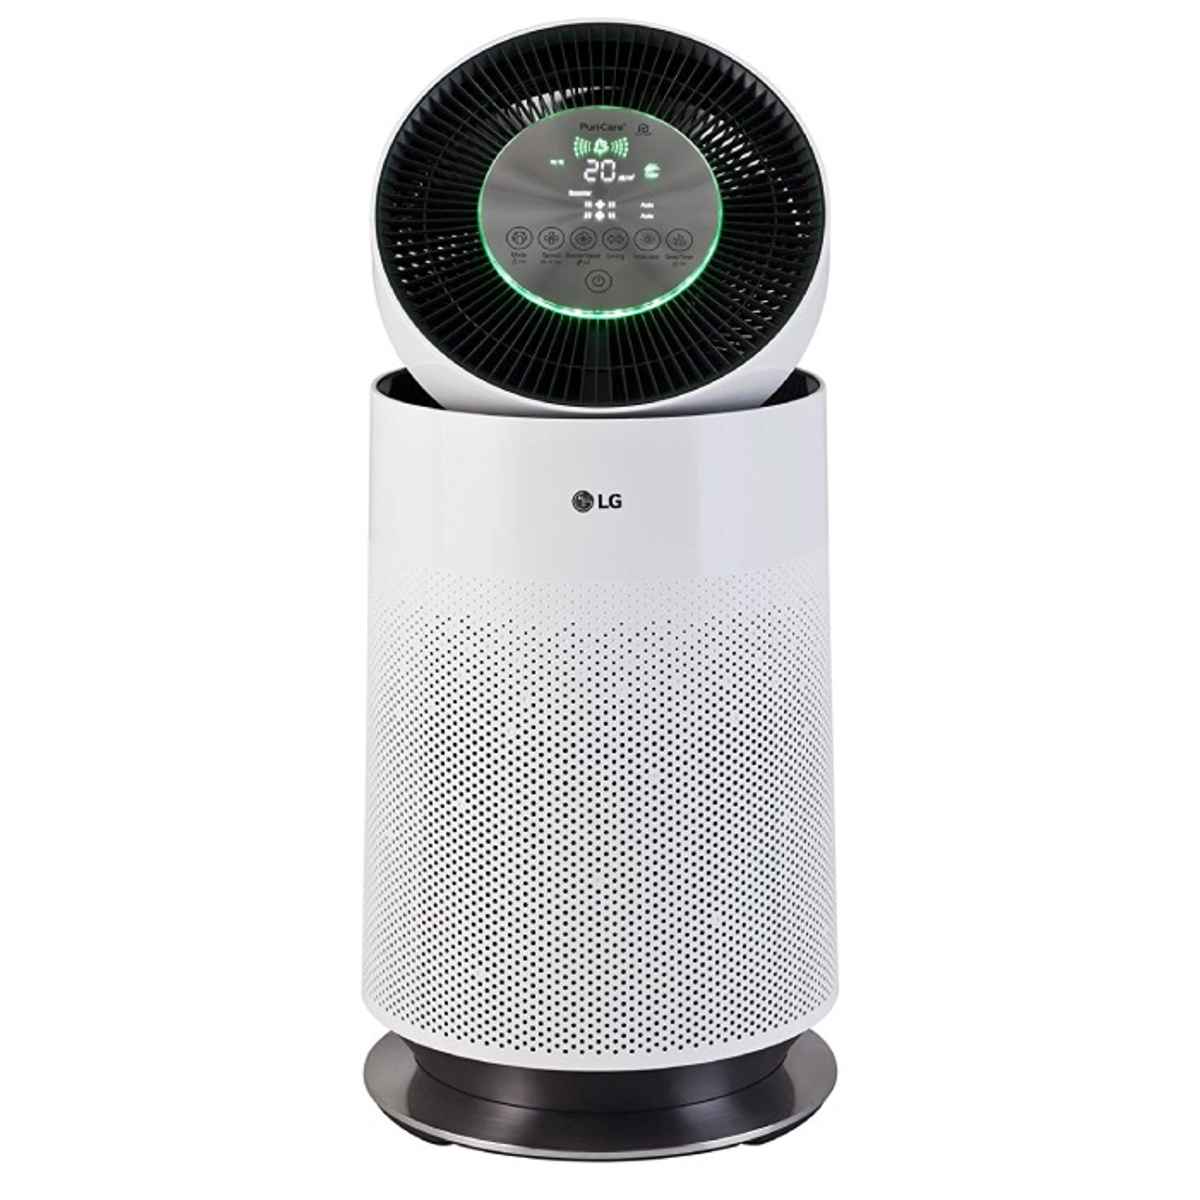 LG PuriCare Air Purifier( AS60GDWT0) Air Purifier Price in India